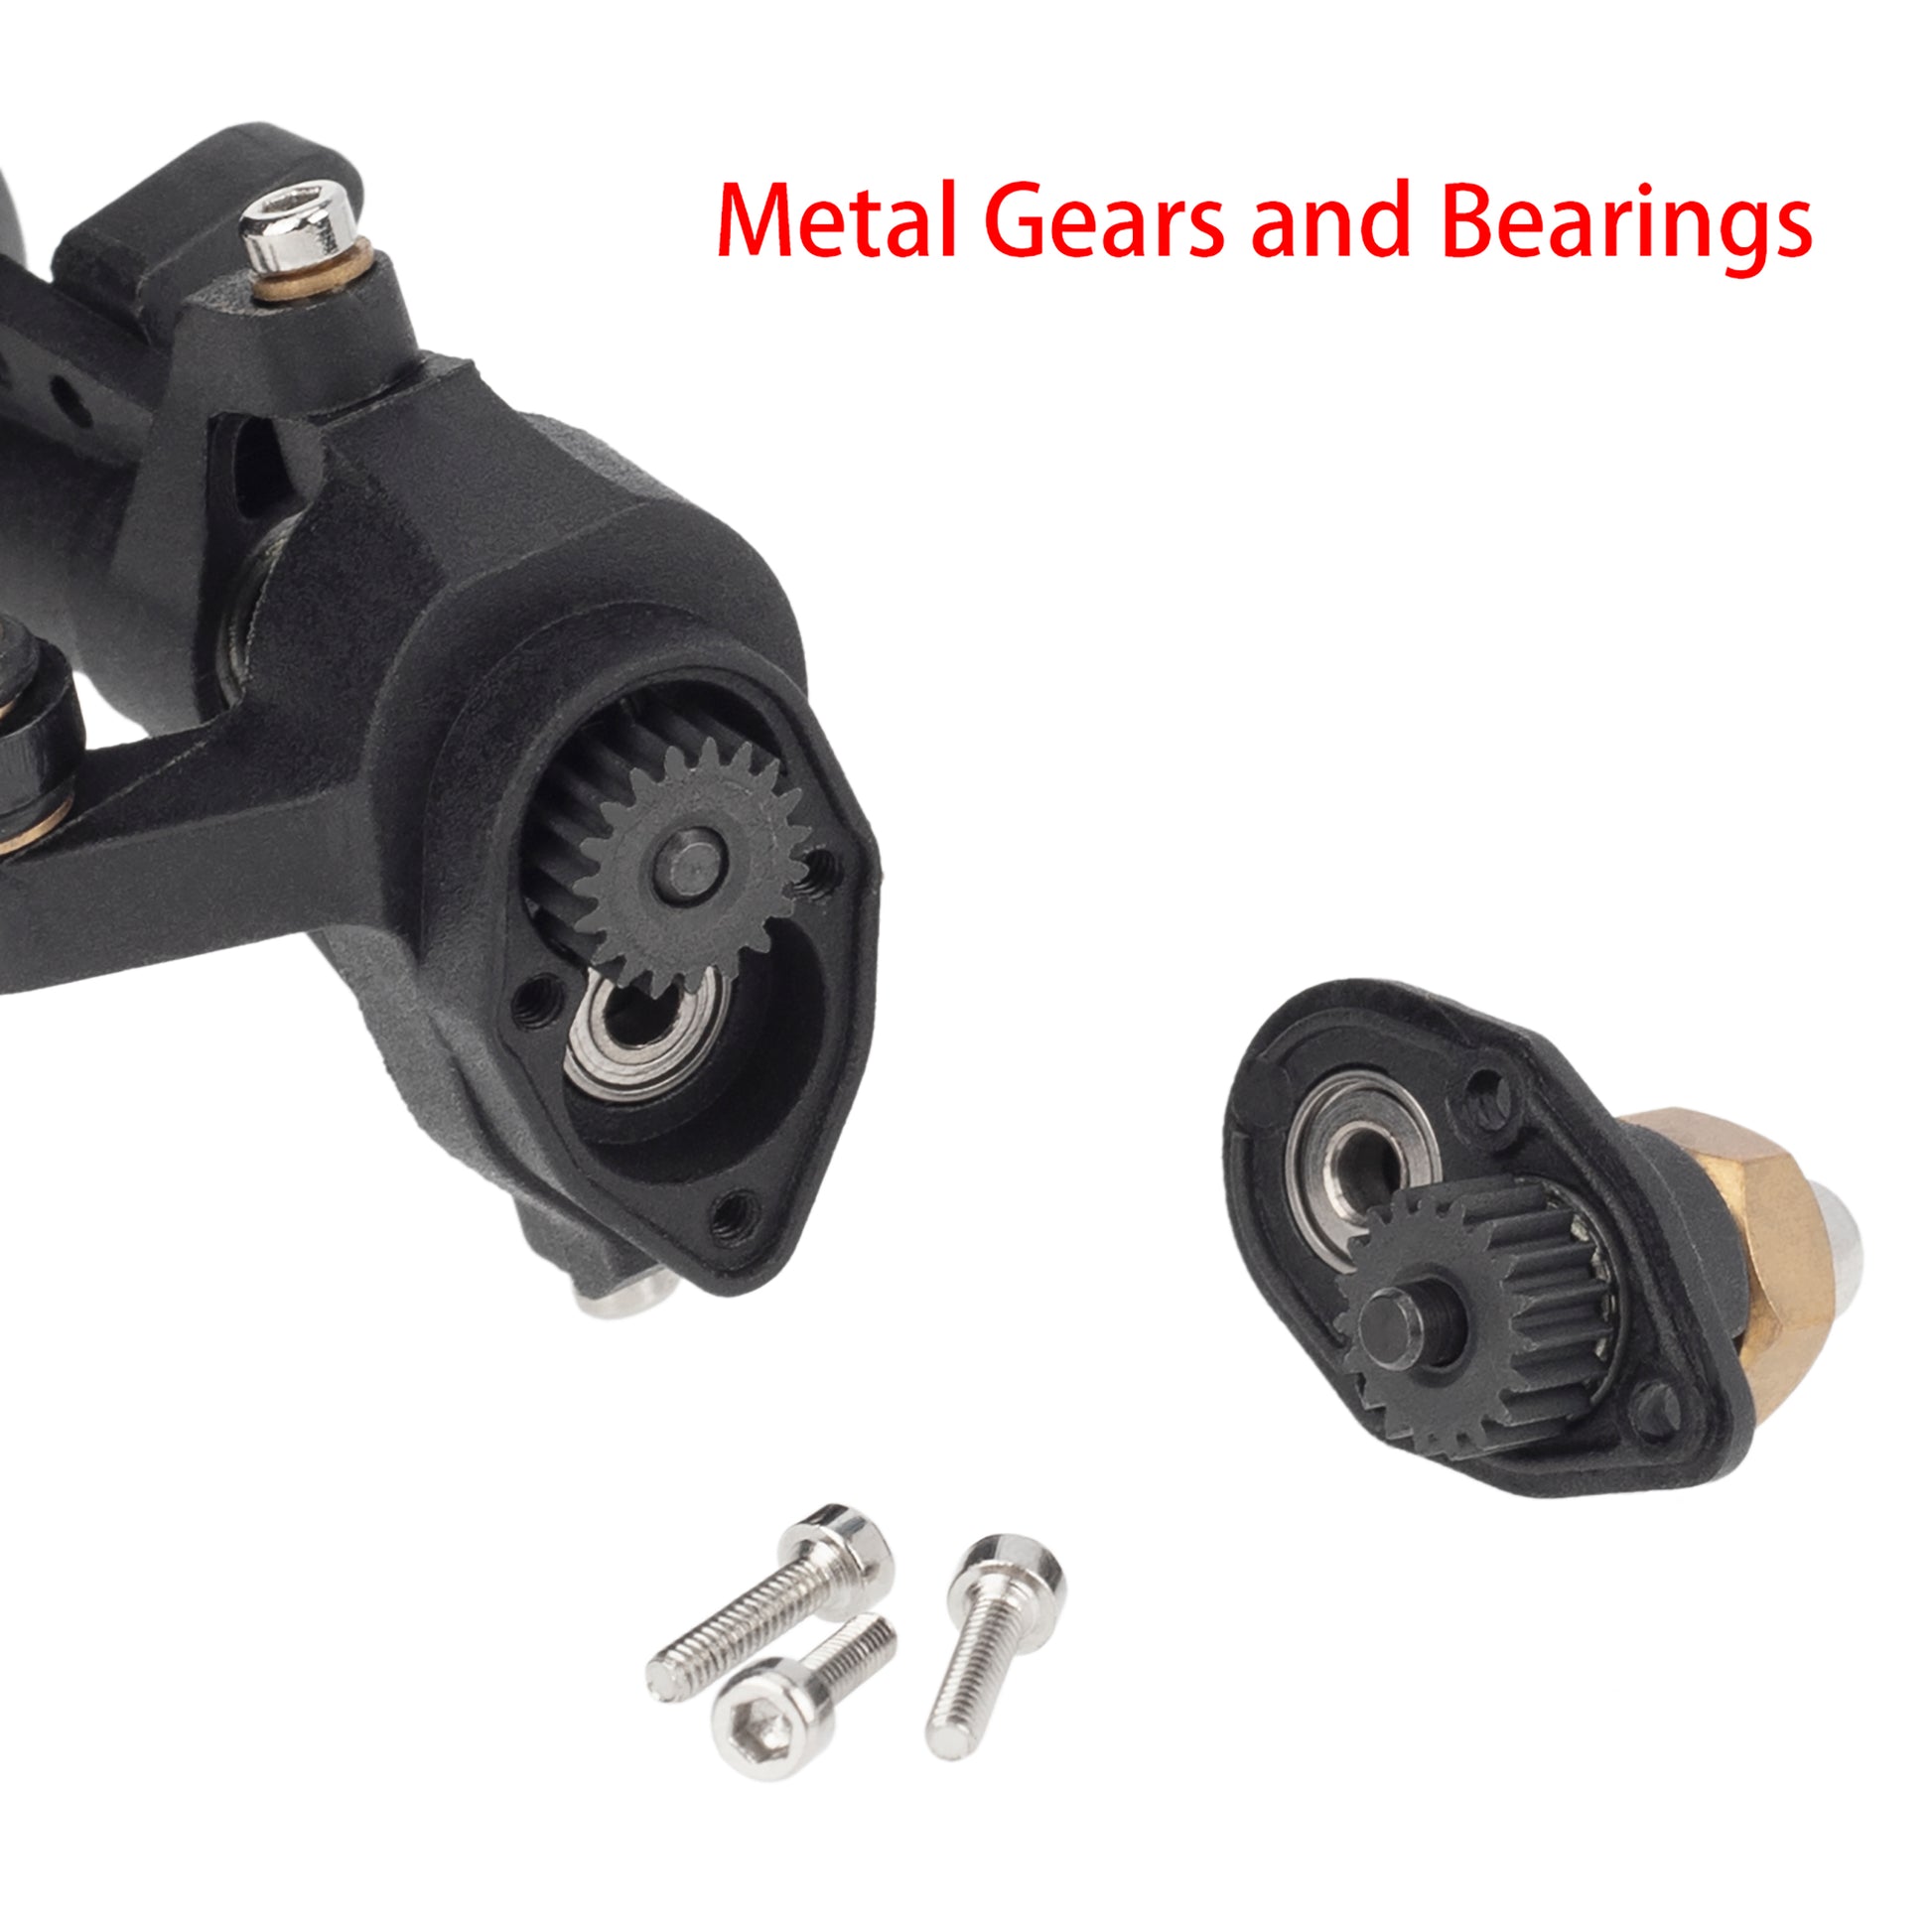 Front Portal Axle steering knuckle with metal gears and bearings 